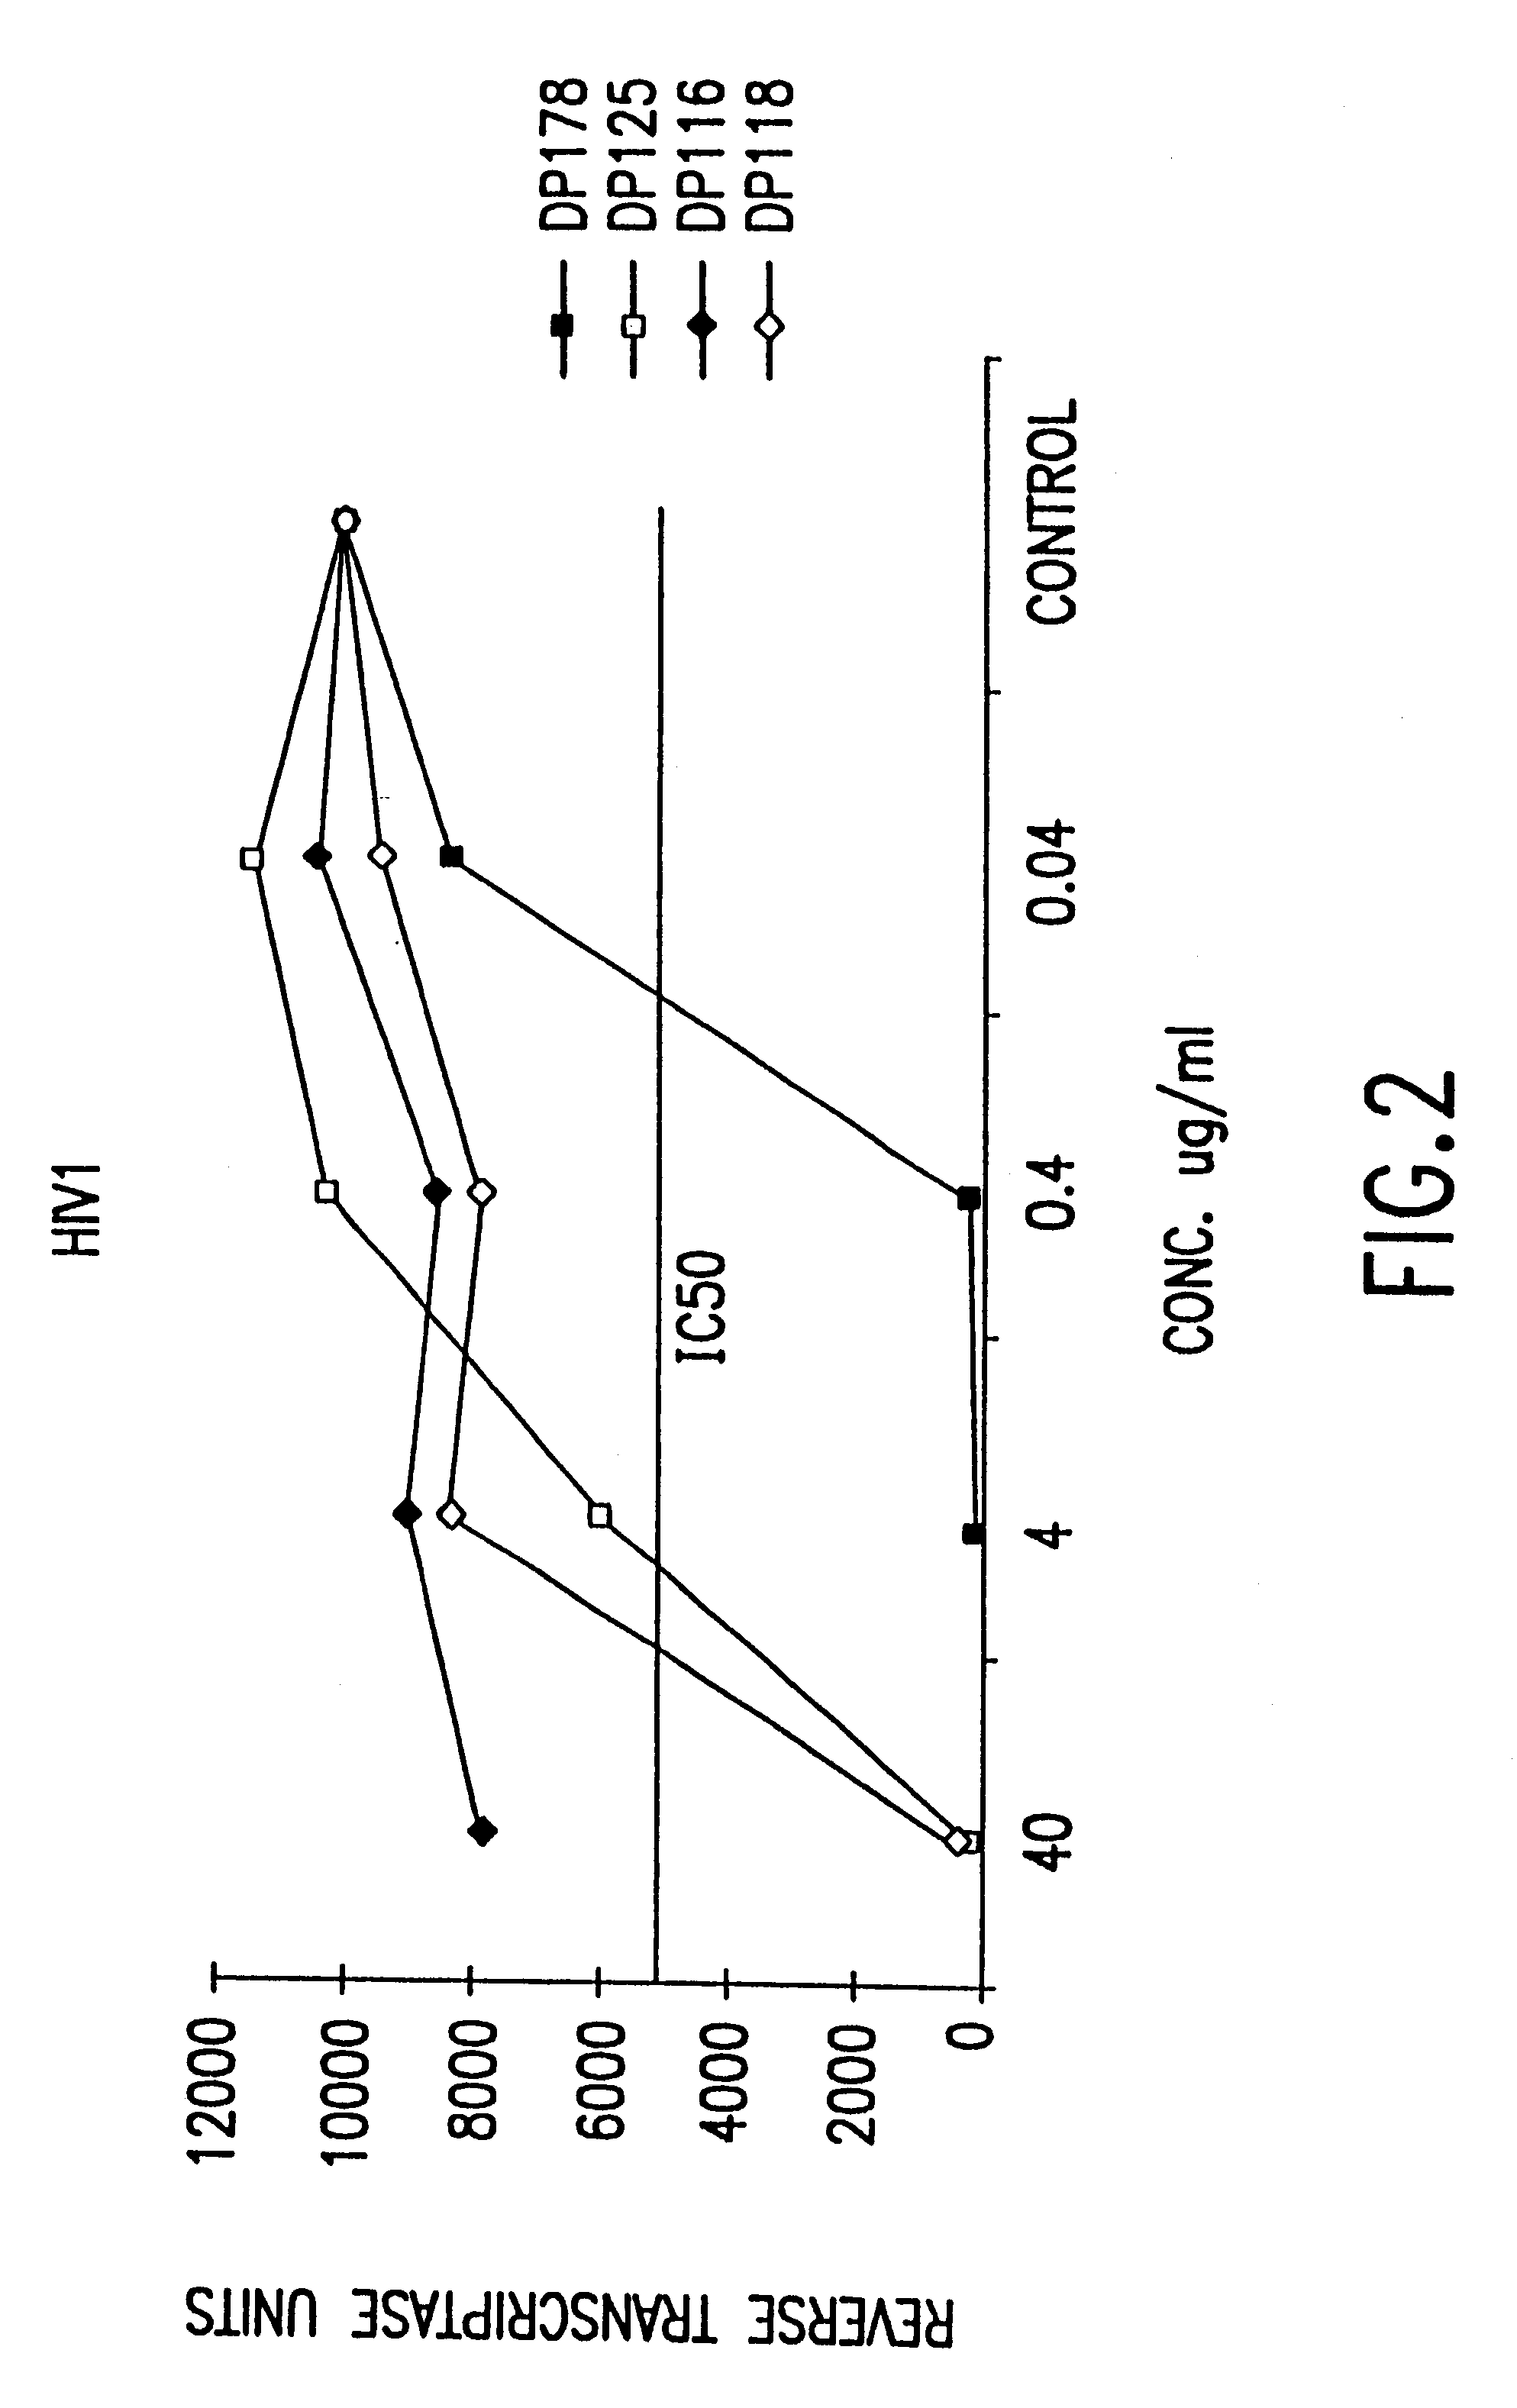 Methods for the inhibition of epstein-barr virus transmission employing anti-viral peptides capable of abrogating viral fusion and transmission